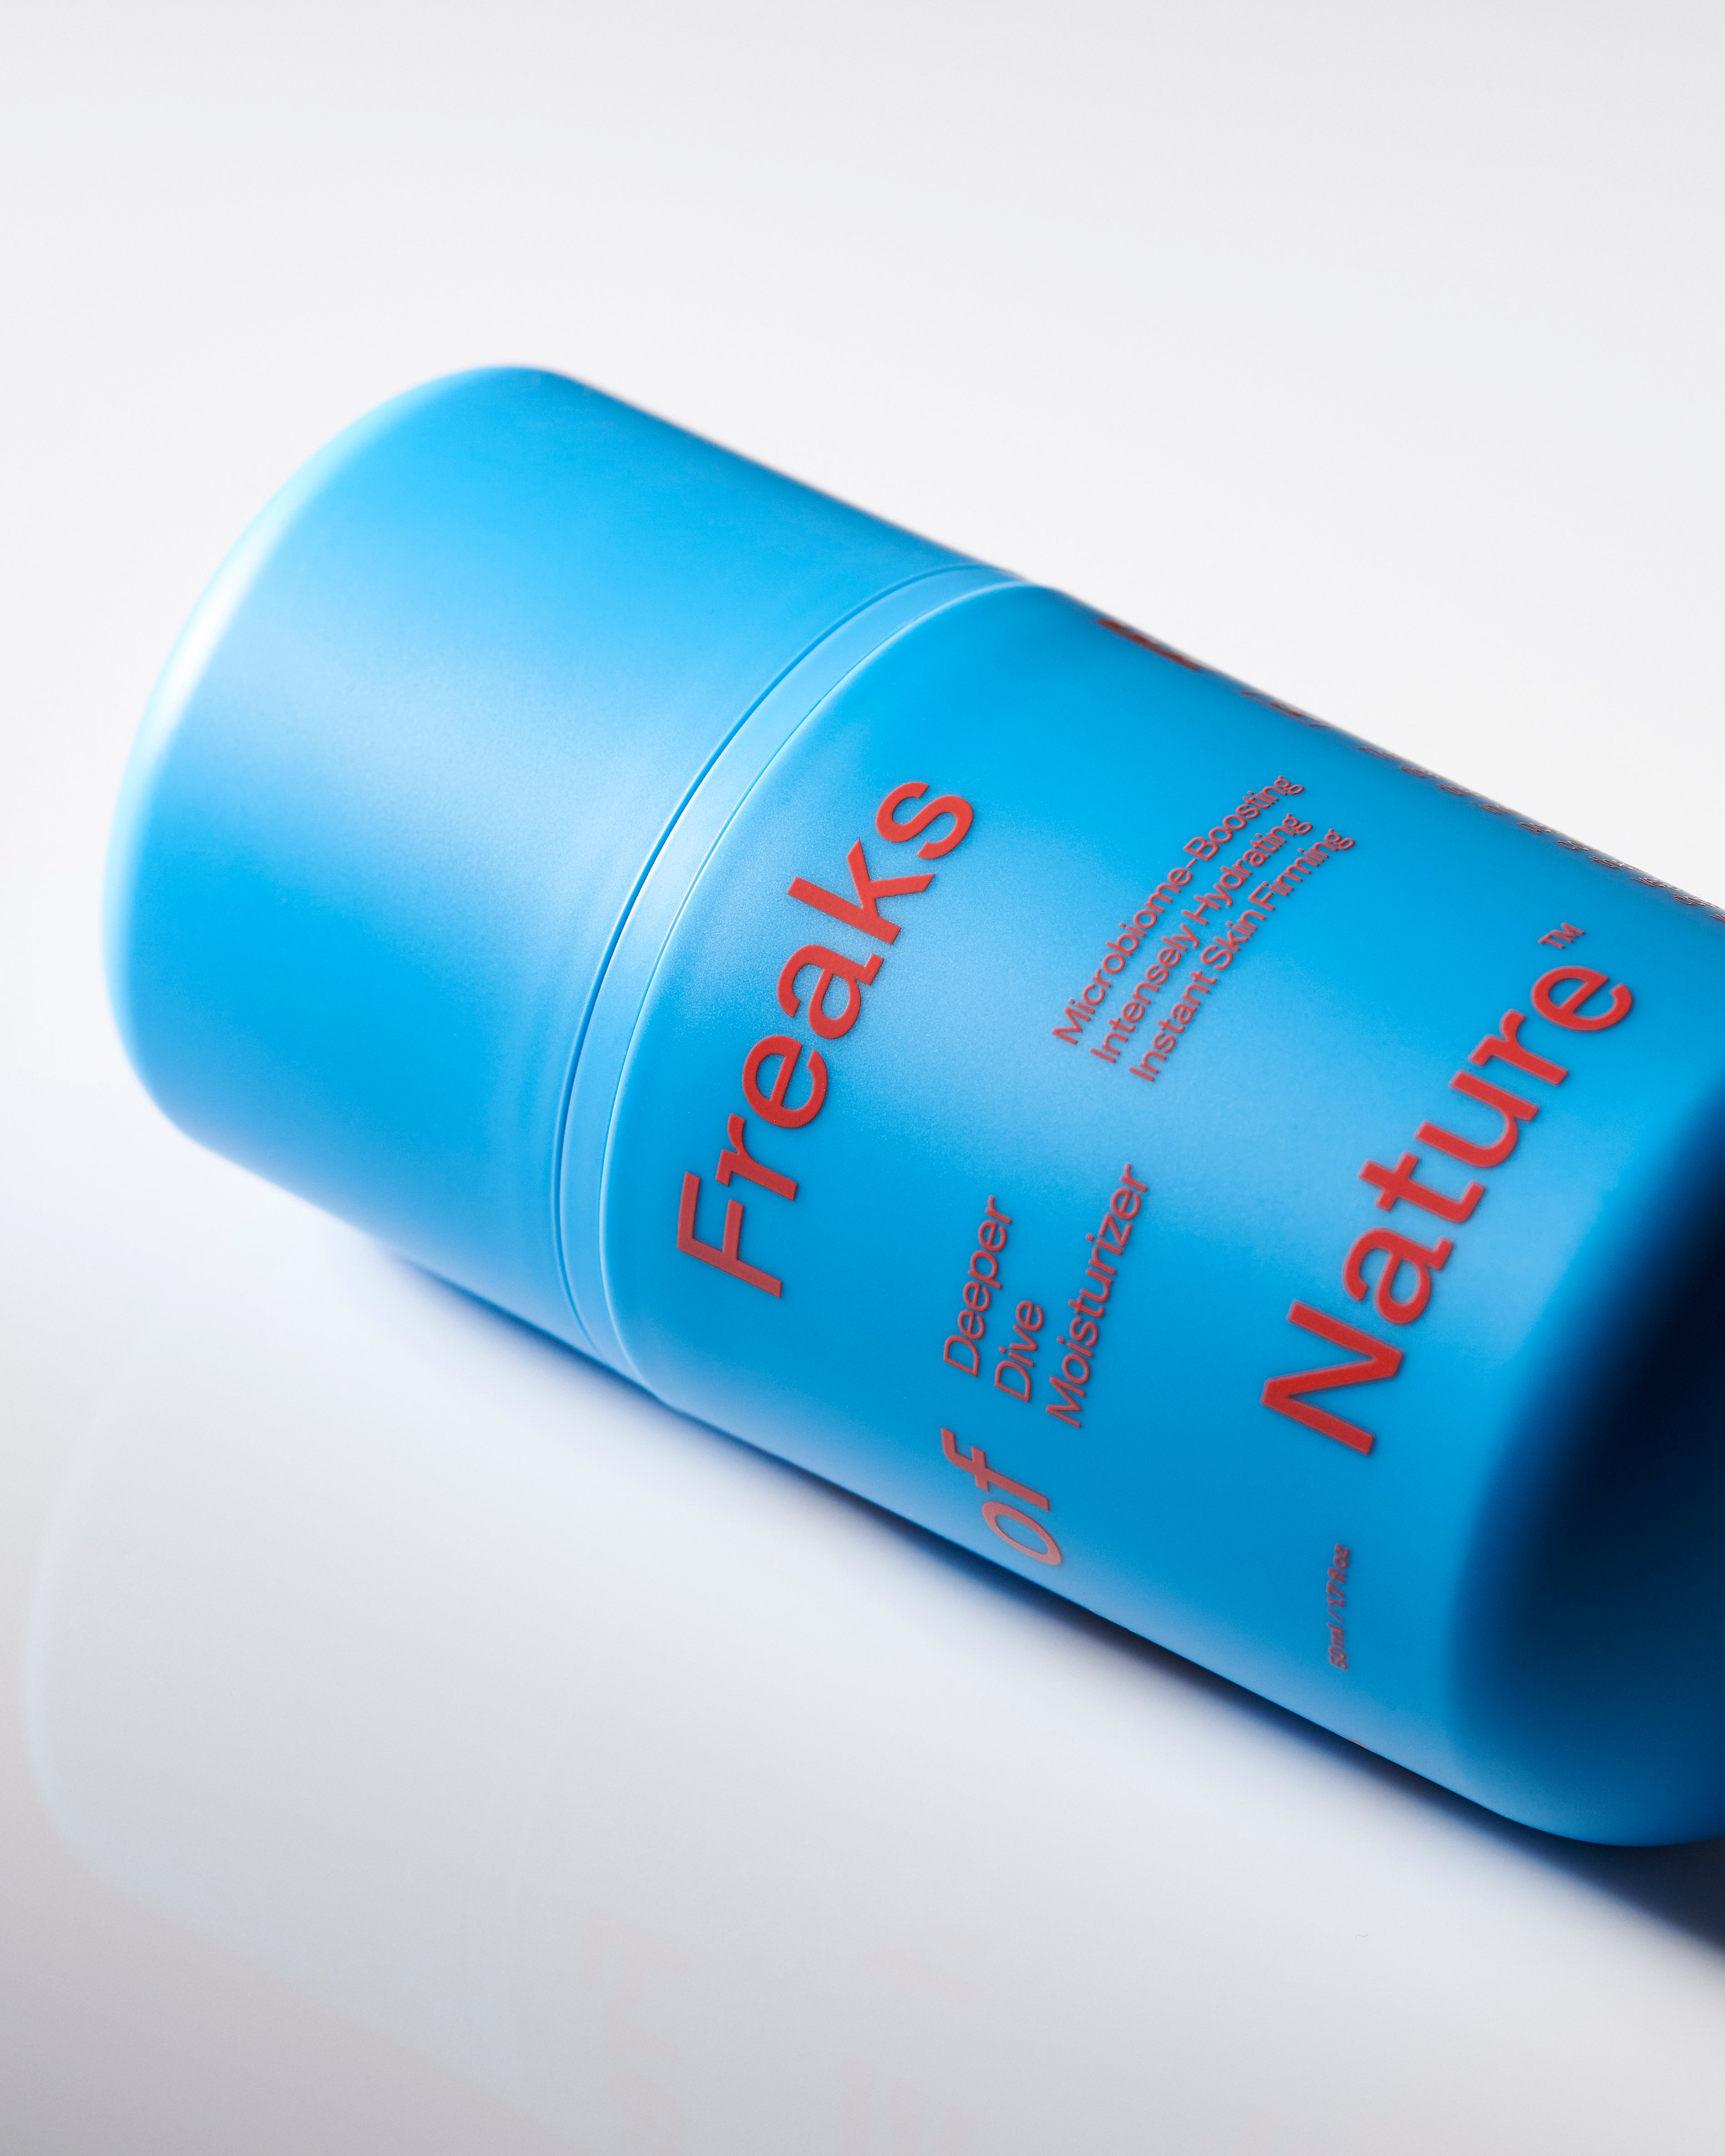 A blue cylindrical container with red text, labeled "Freaks of Nature Skincare," indicating its "Daily System" formula enriched with vegan Squalane. Additional text and product details are visible. The container lies on its side against a plain white background, casting a subtle reflection.